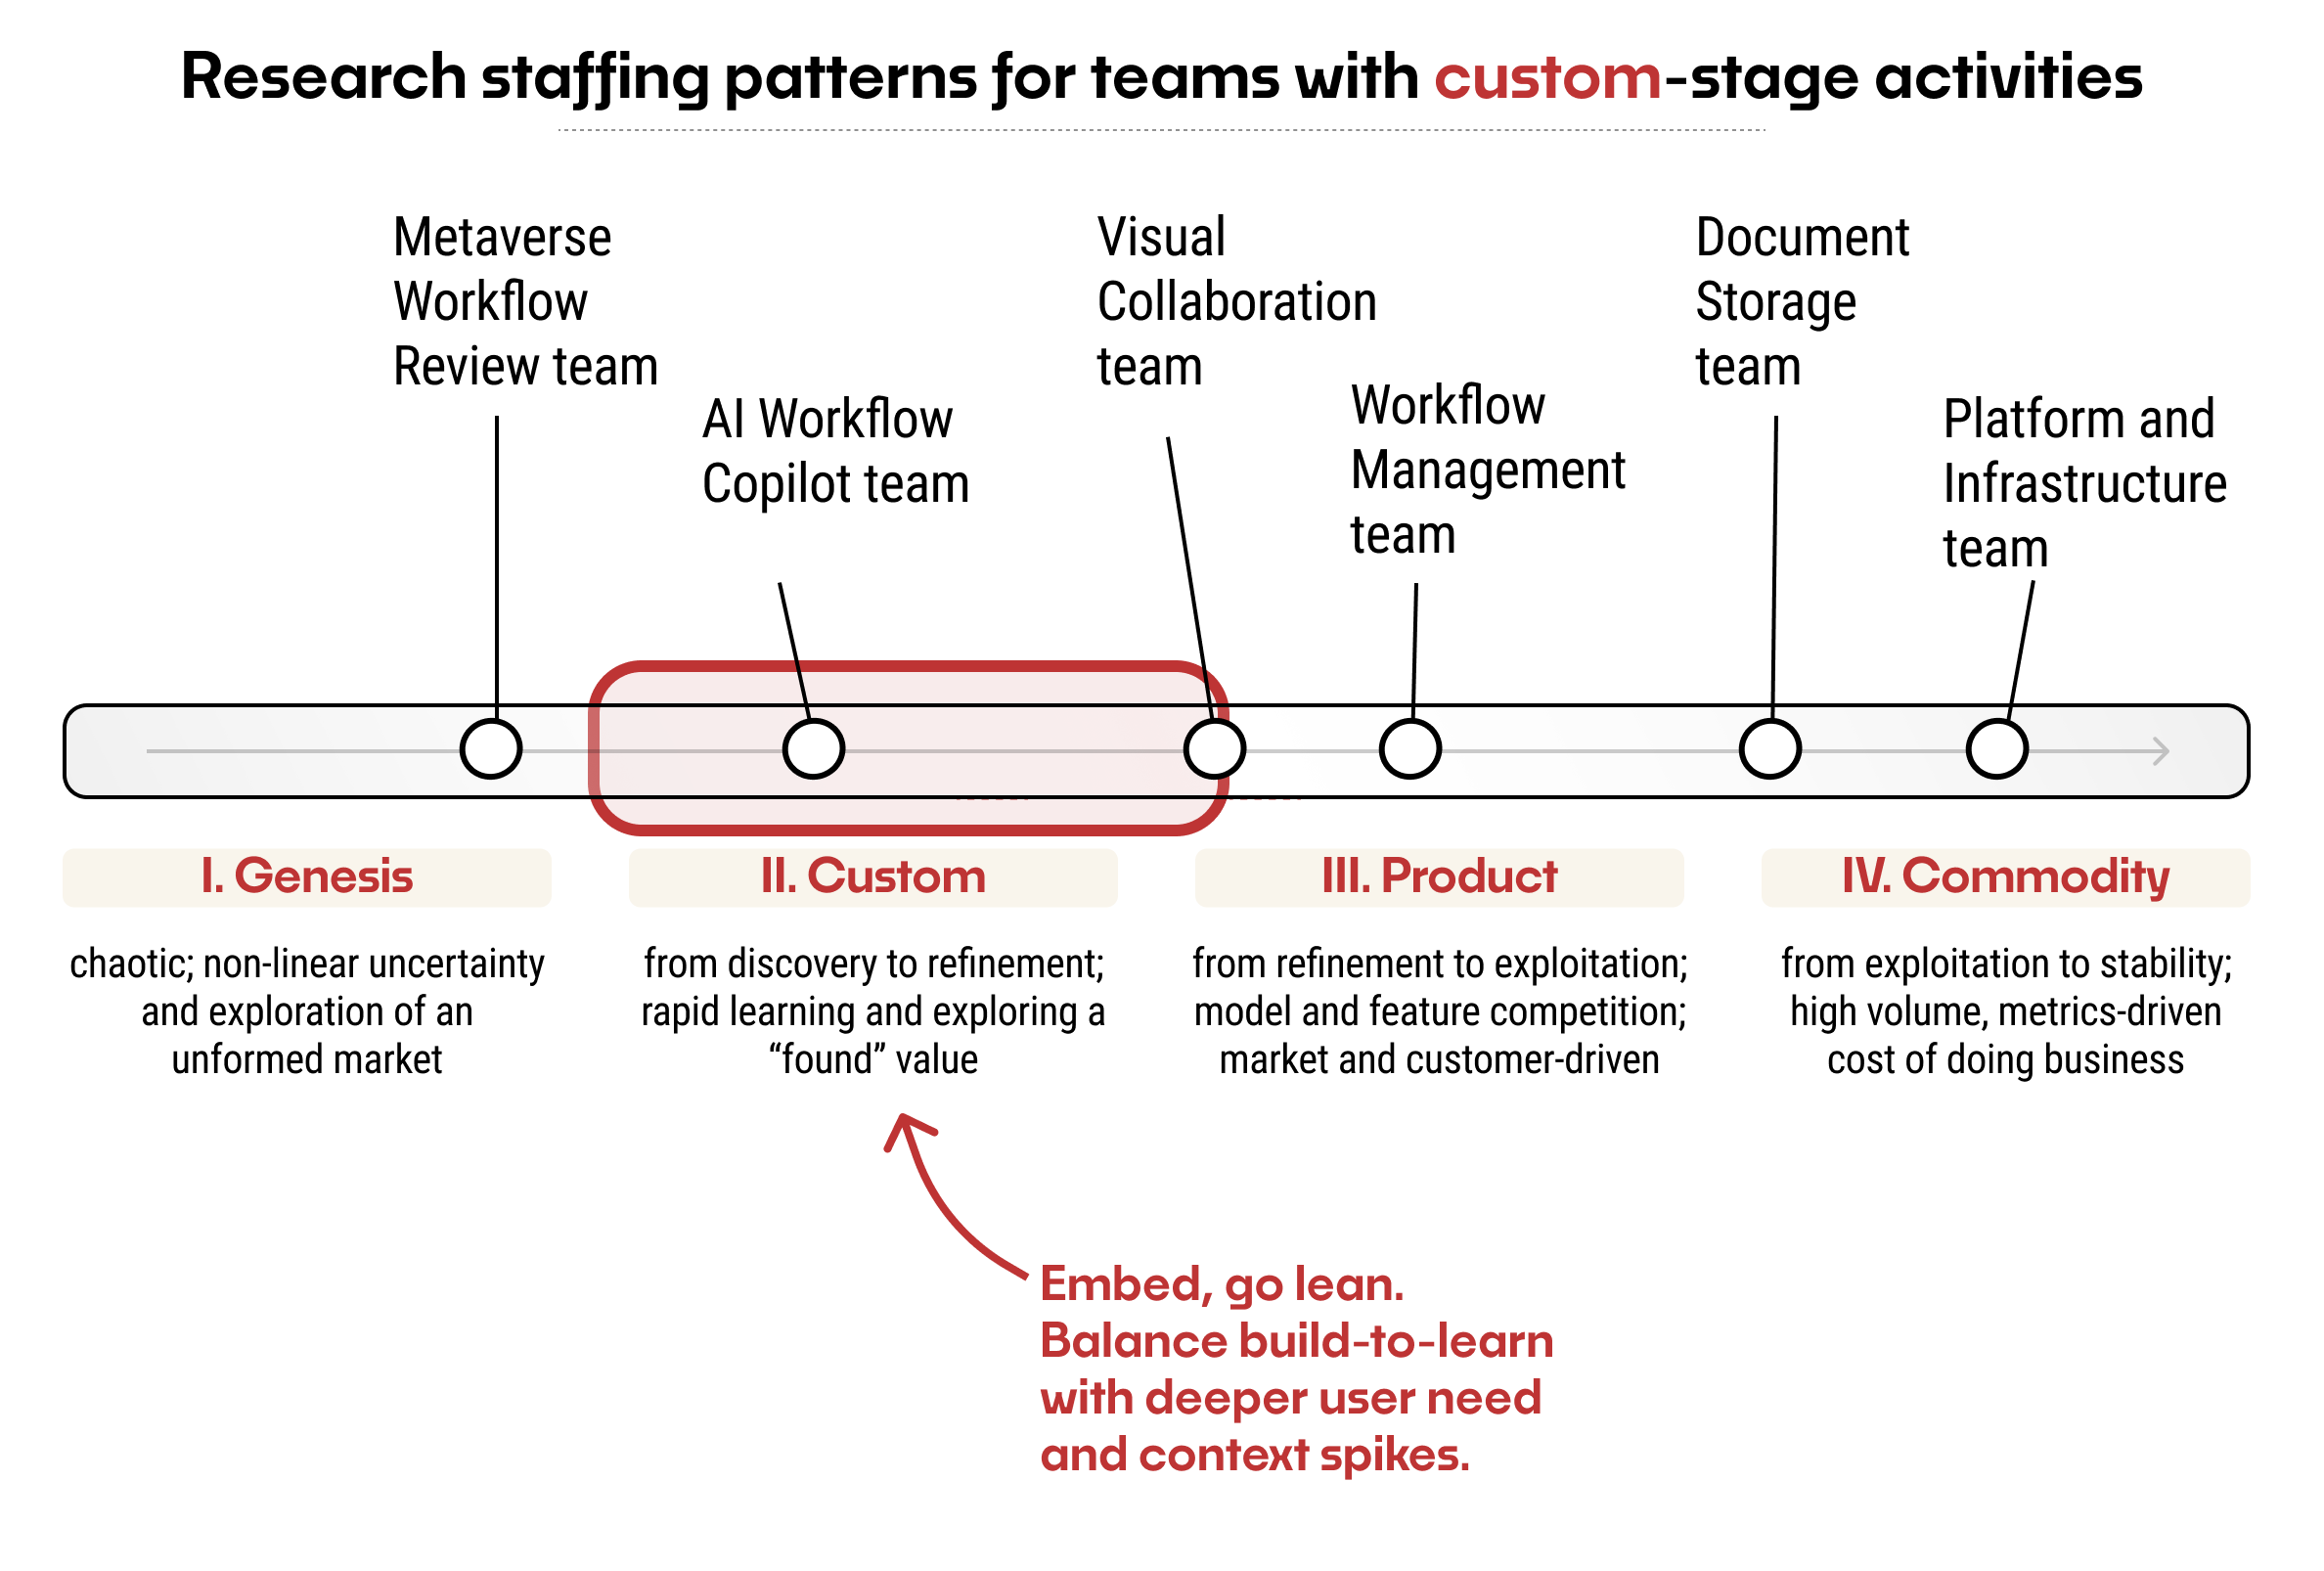 The same spectrum of teams as above, with the Custom stage highlighted, and a recommendation to: Embed, go lean. Balance build-to-learn with deeper user need and context spikes.